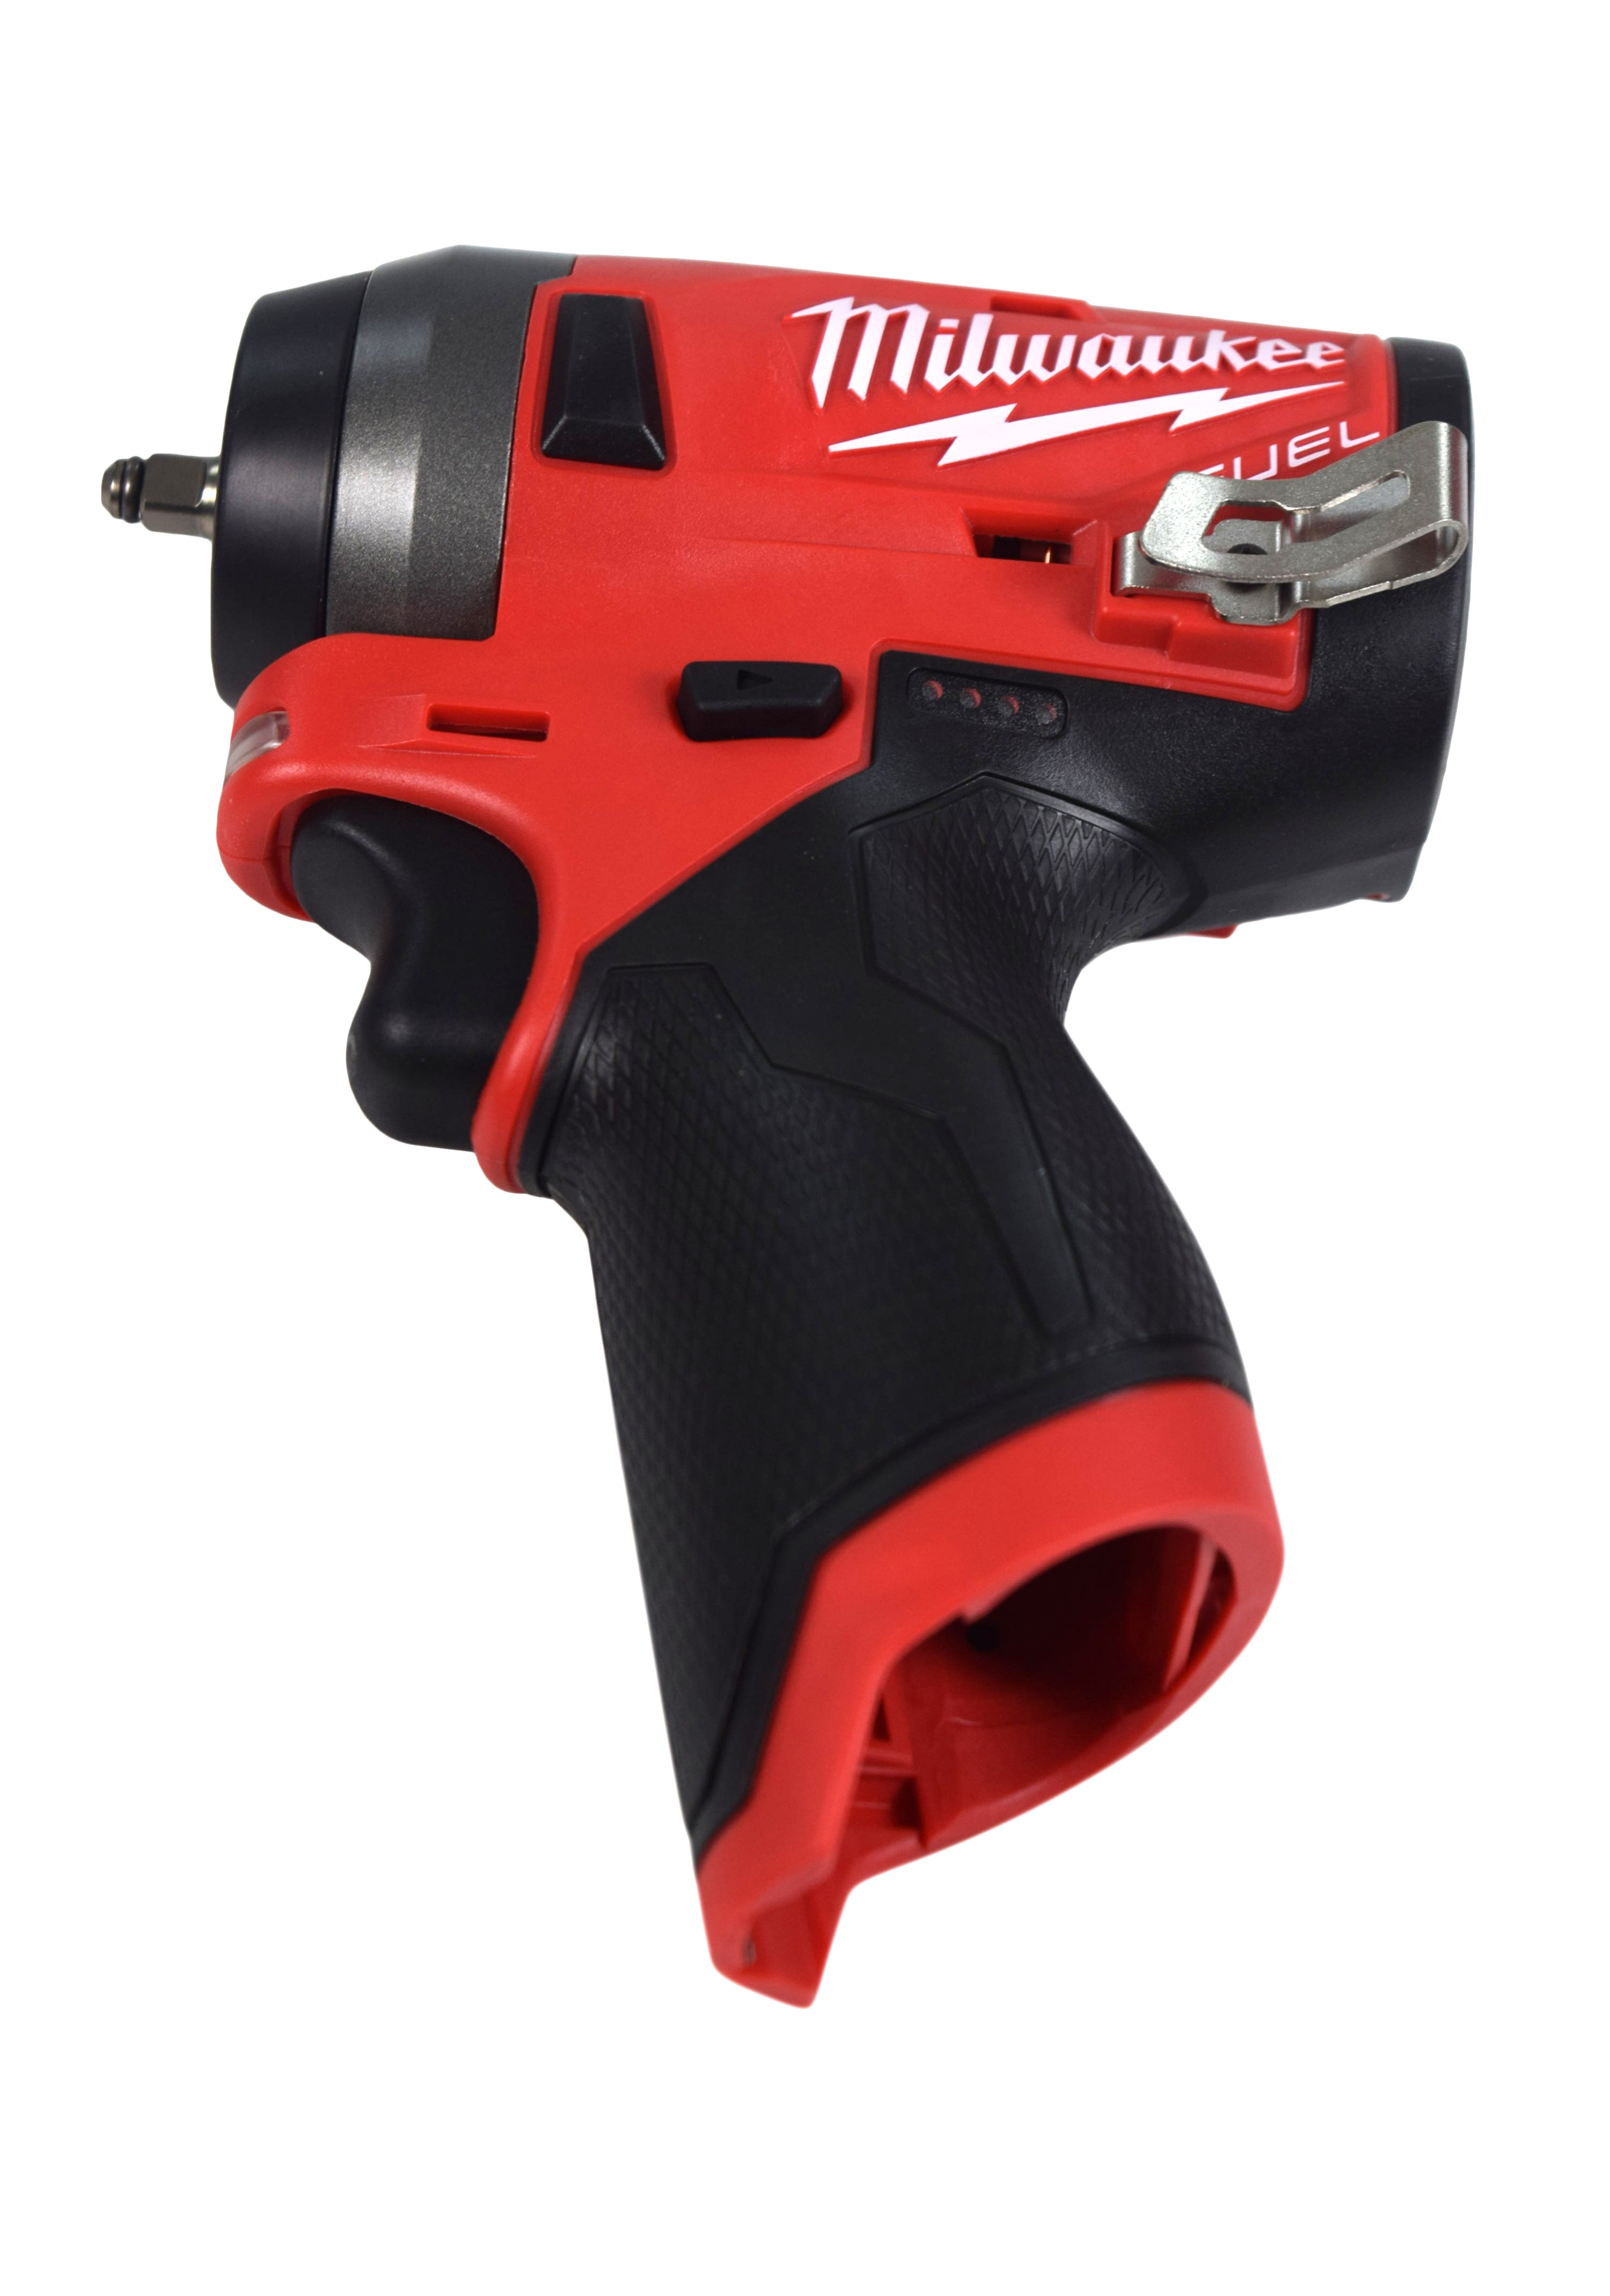 Milwaukee 2552-22 M12 FUEL 12V Stubby 1/4 in. Impact Wrench Kit